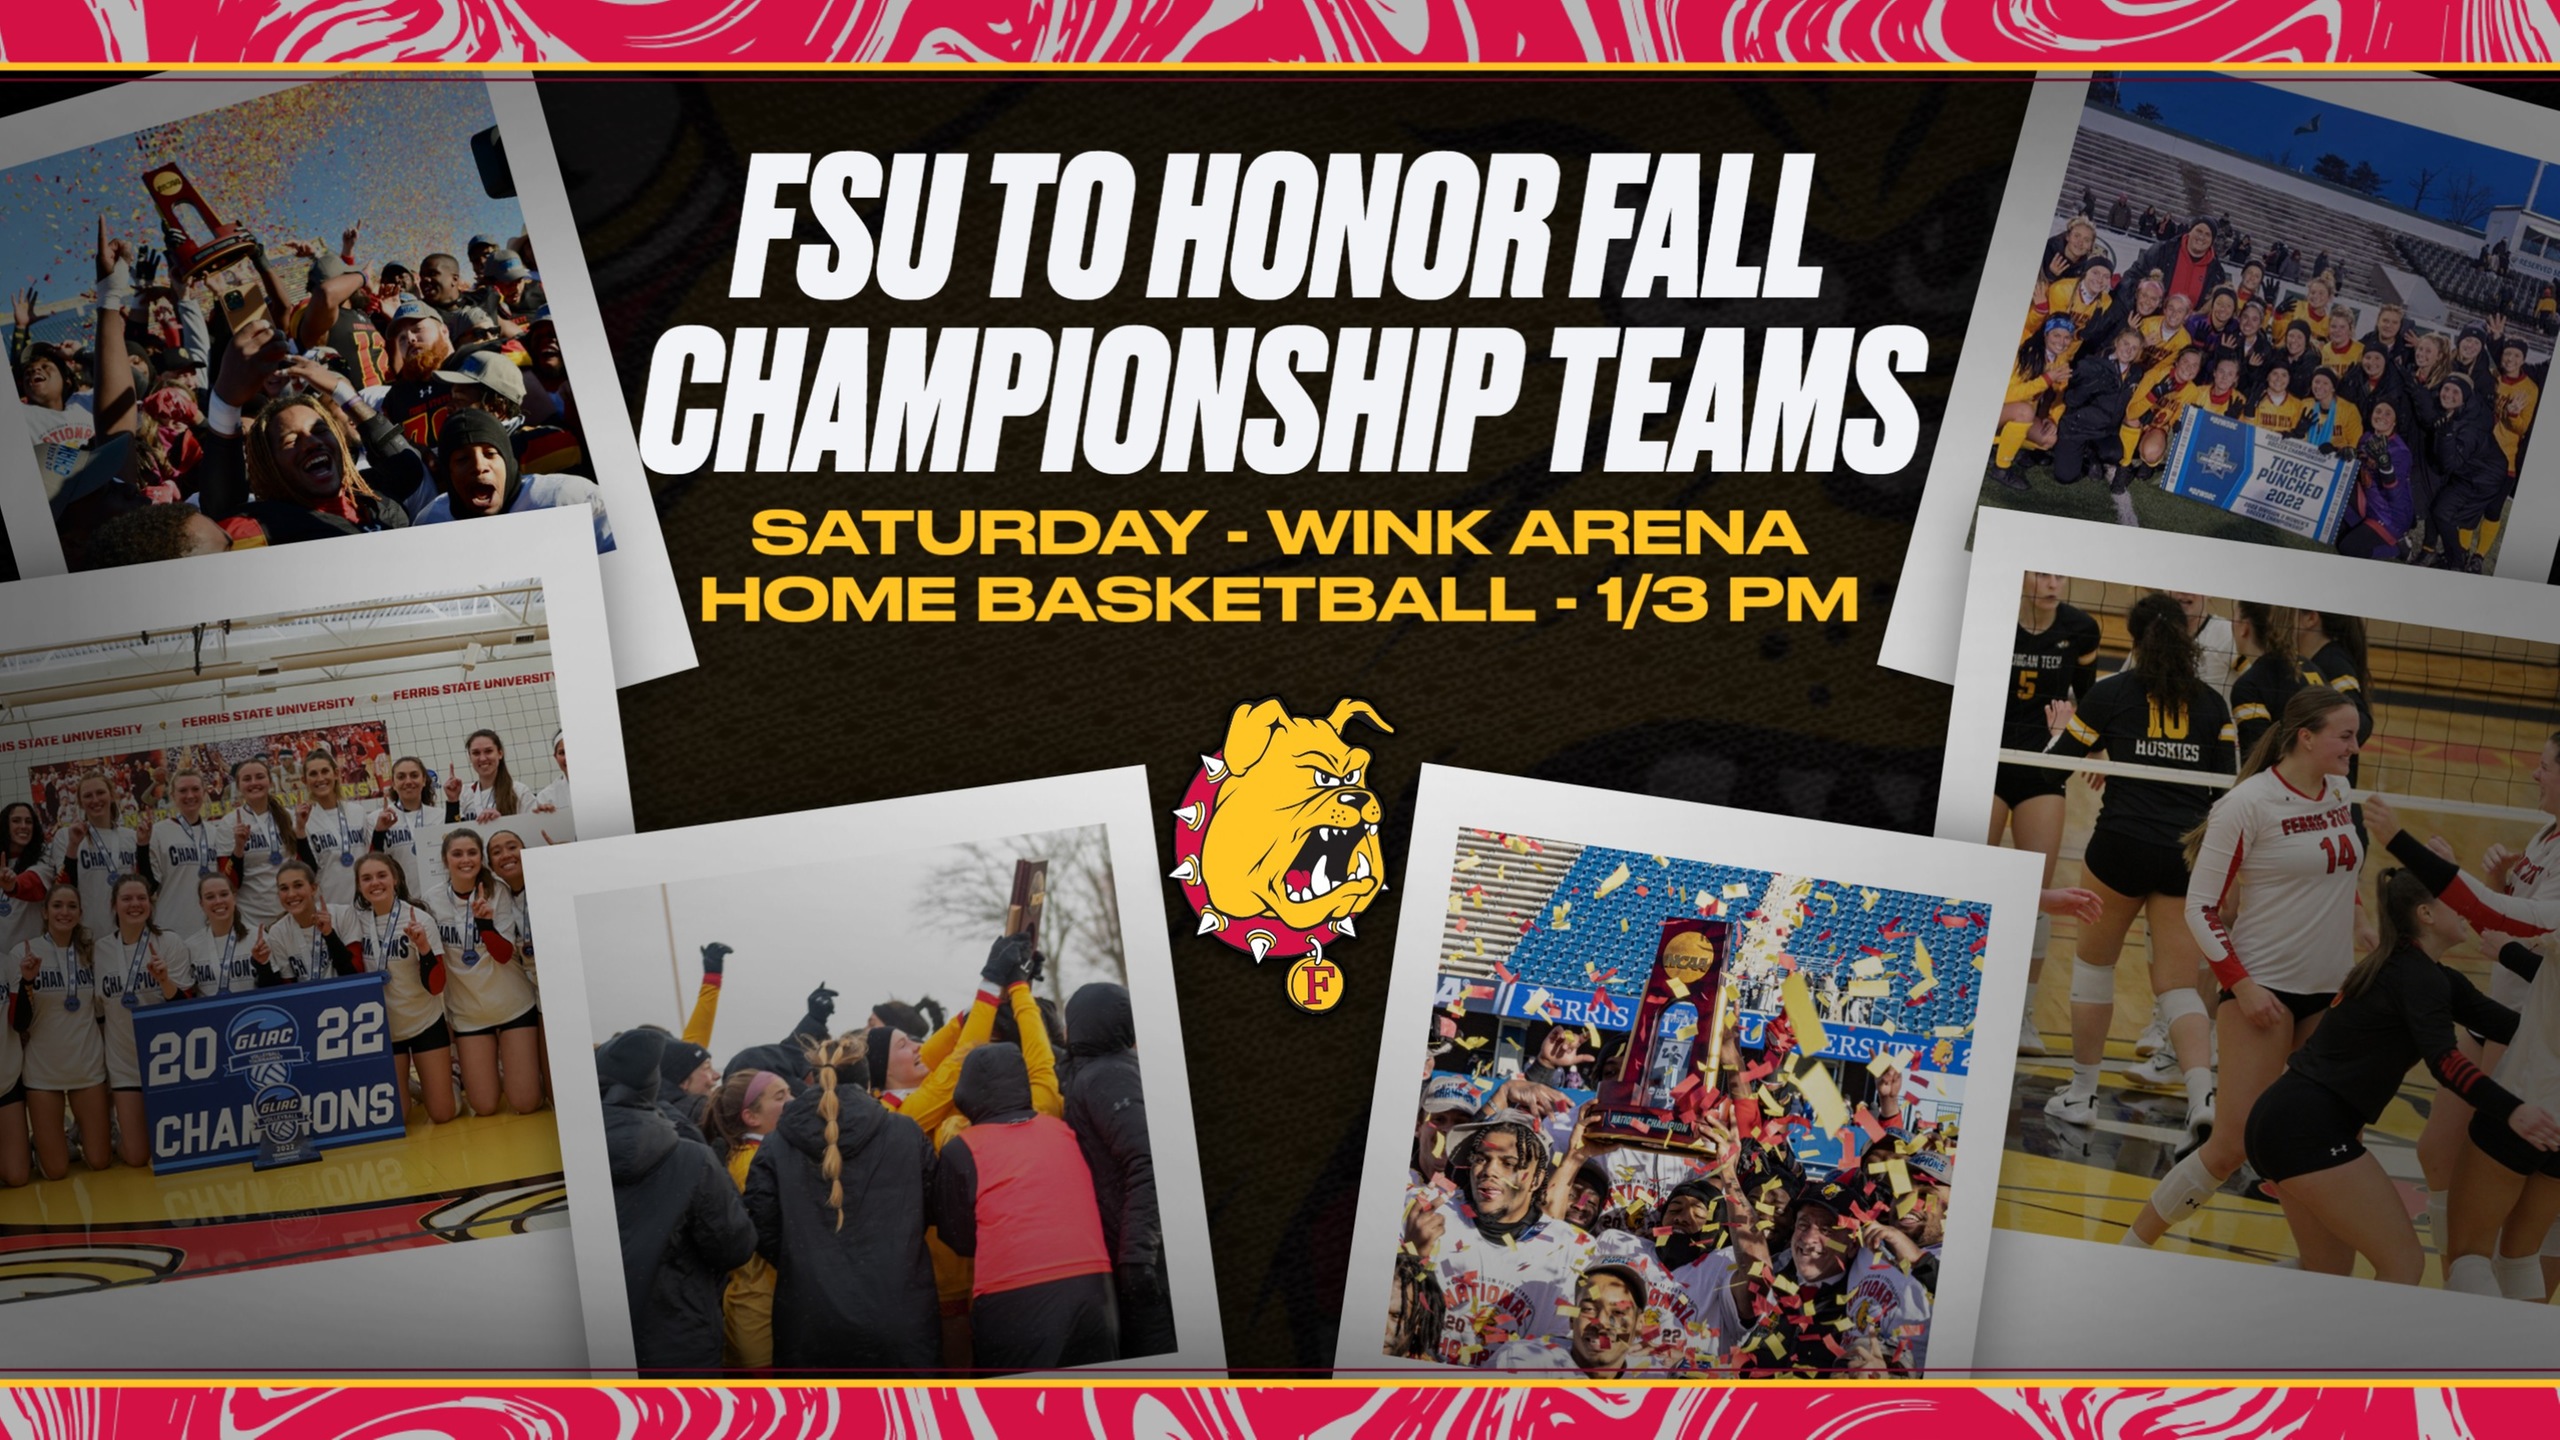 Ferris State To Honor Fall Championship Teams During Saturday's Home Basketball Doubleheader